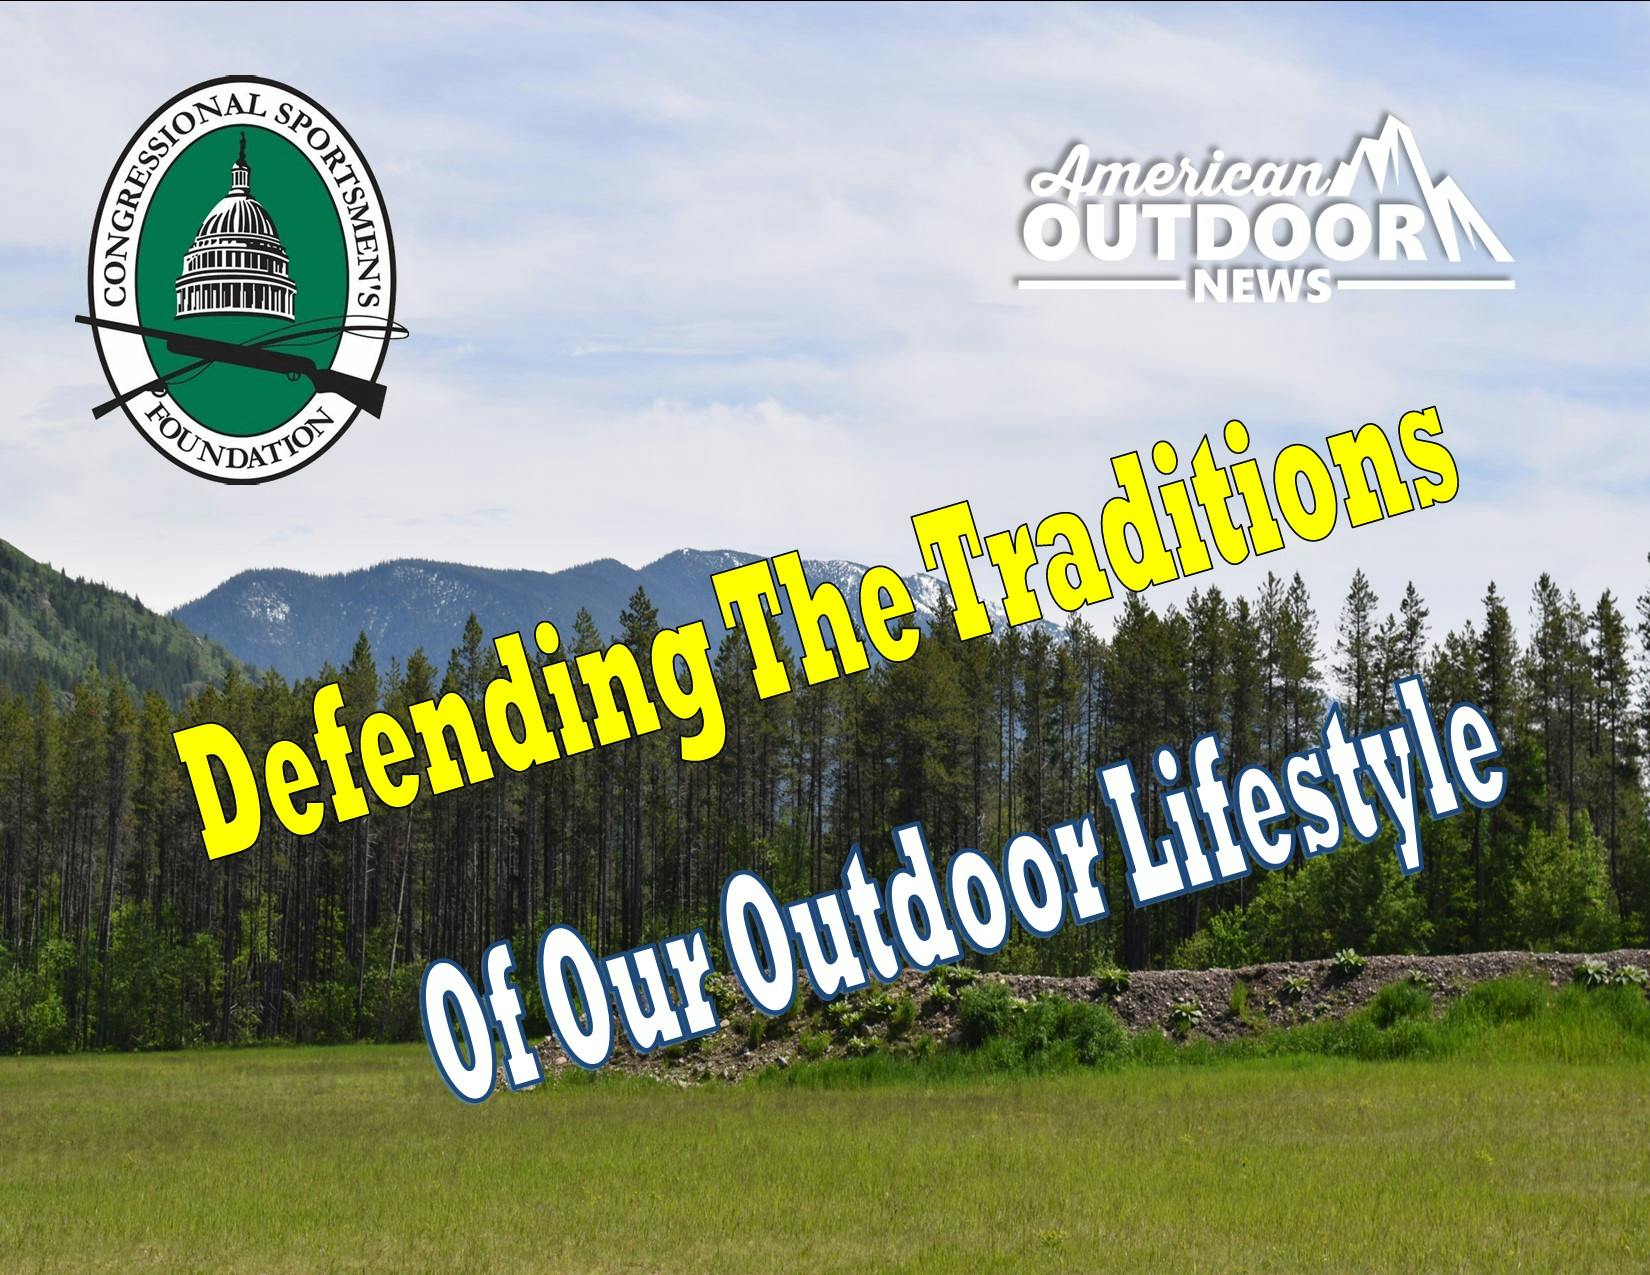 Defending the Traditions of Our Outdoor Lifestyle